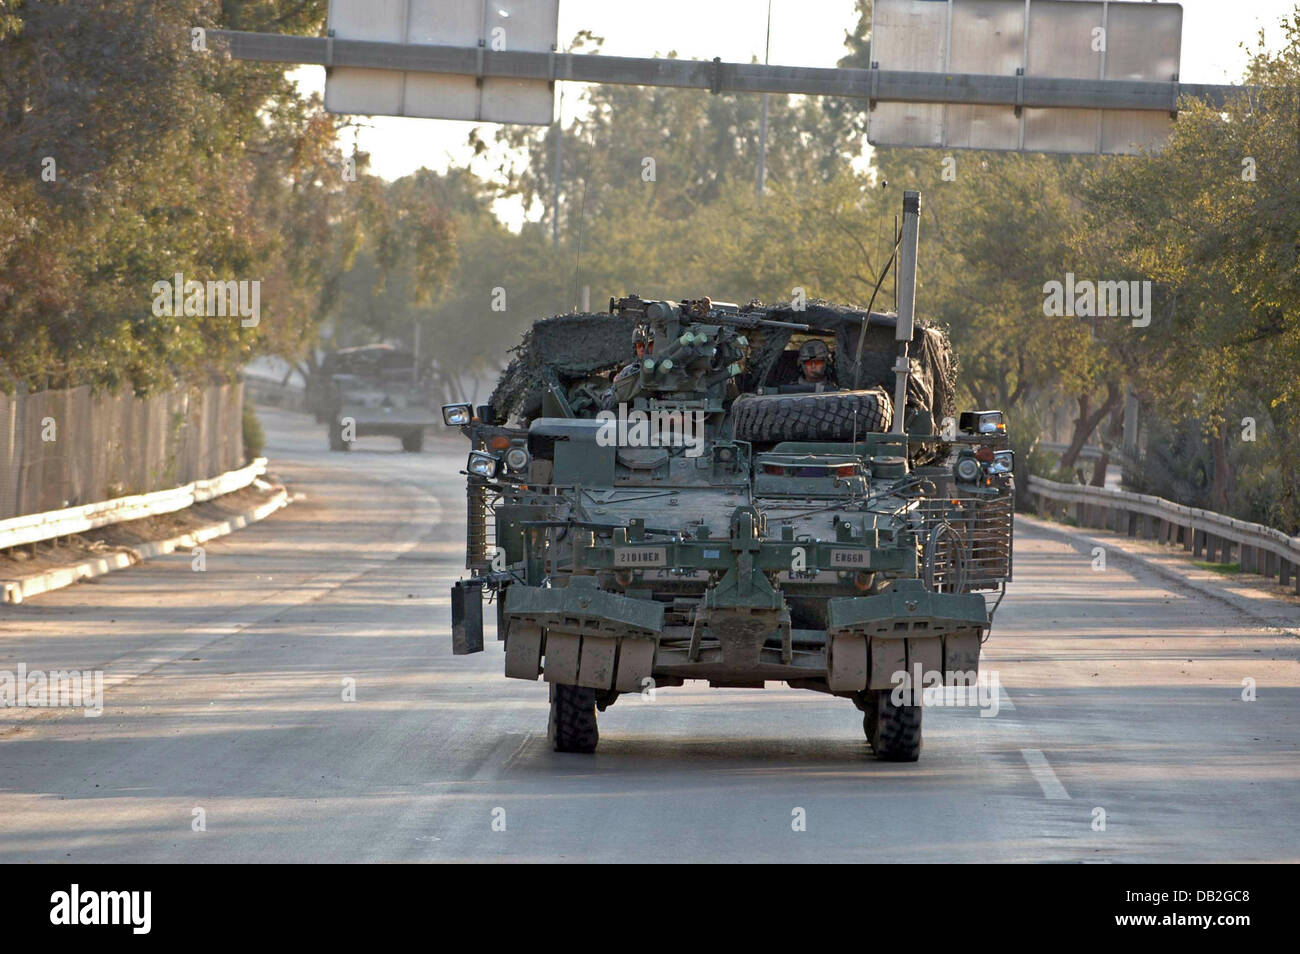 An AM1133 Stryker Engineer Squad Vehicle of the US 3rd Stryker Brigade Combat Team patrols the 'Irish' road in Bagdad, Iraq, March 2007. The Road connects the 'International Zone' with the Bagdad International Airport. It has been the stage of many attacks on the US troops. Photo: Carl Schulze Stock Photo